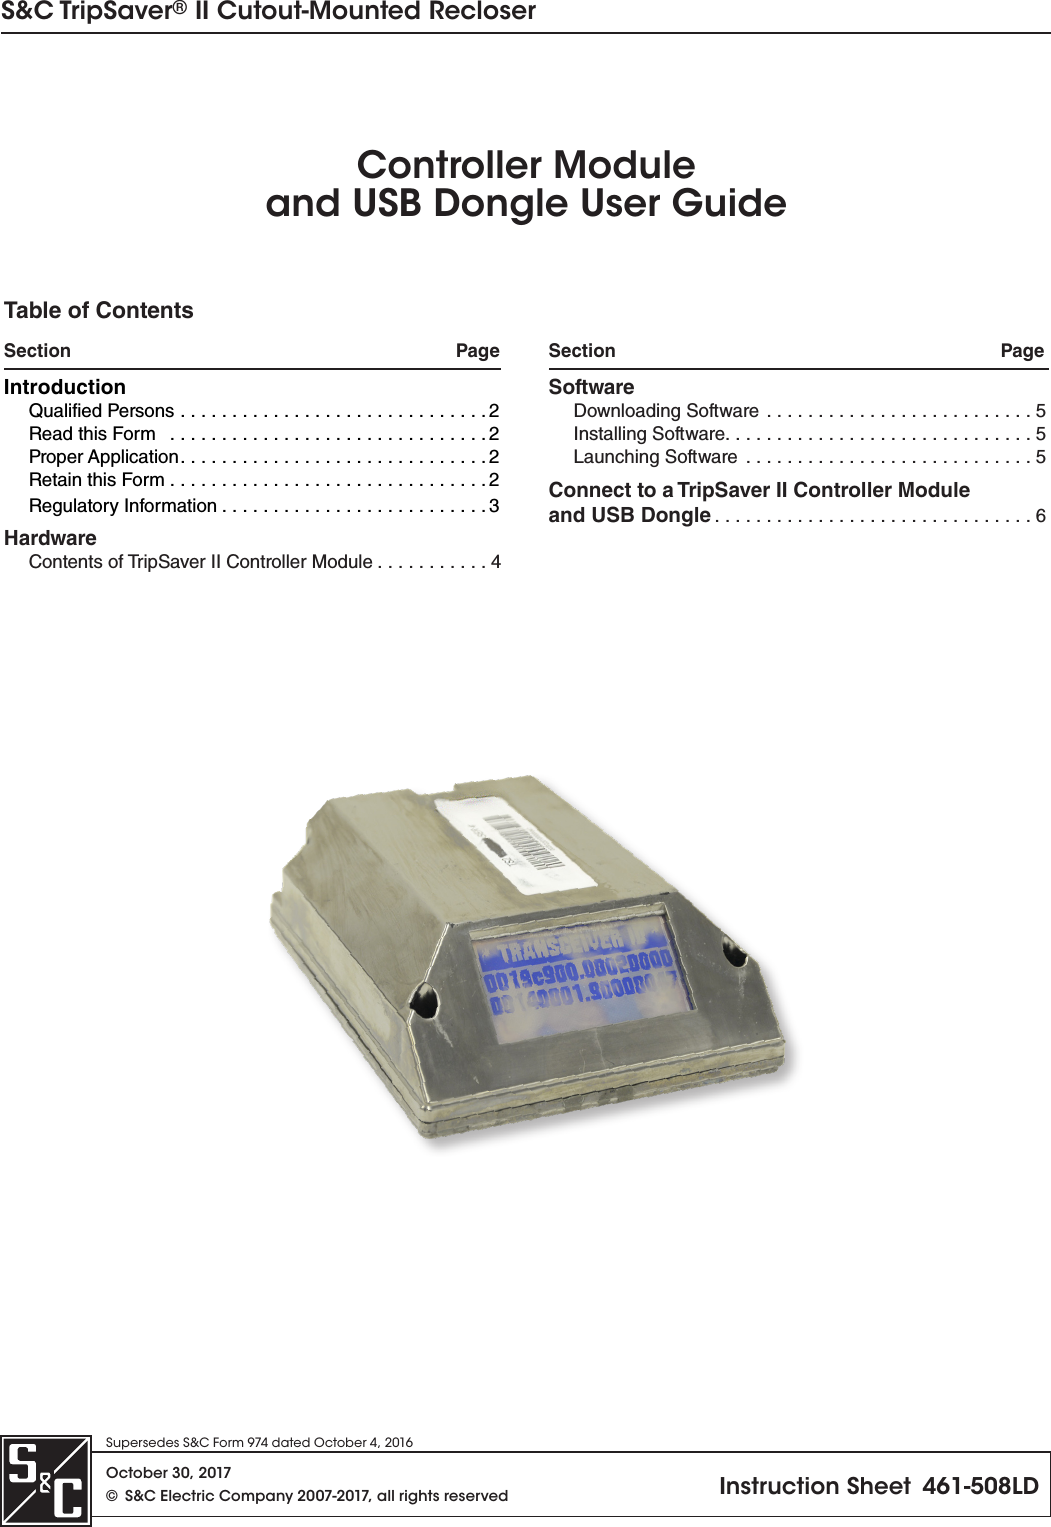 S&amp;C TripSaver® II Cutout-Mounted RecloserSupersedes S&amp;C Form 974 dated October 4, 2016October 30, 2017©  S&amp;C Electric Company 2007-2017, all rights reserved Instruction Sheet  461-508LDController Moduleand USB Dongle User GuideTable of ContentsSection   Page Section  PageIntroductionQualified Persons  ..............................2Read this Form   ...............................2Proper Application ..............................2 Retain this Form ...............................2Regulatory Information ..........................3HardwareContents of TripSaver II Controller Module ...........4SoftwareDownloading Software  ..........................5Installing Software. . . . . . . . . . . . . . . . . . . . . . . . . . . . . . 5Launching Software  ............................5Connect to a TripSaver II Controller Module and USB Dongle ...............................6